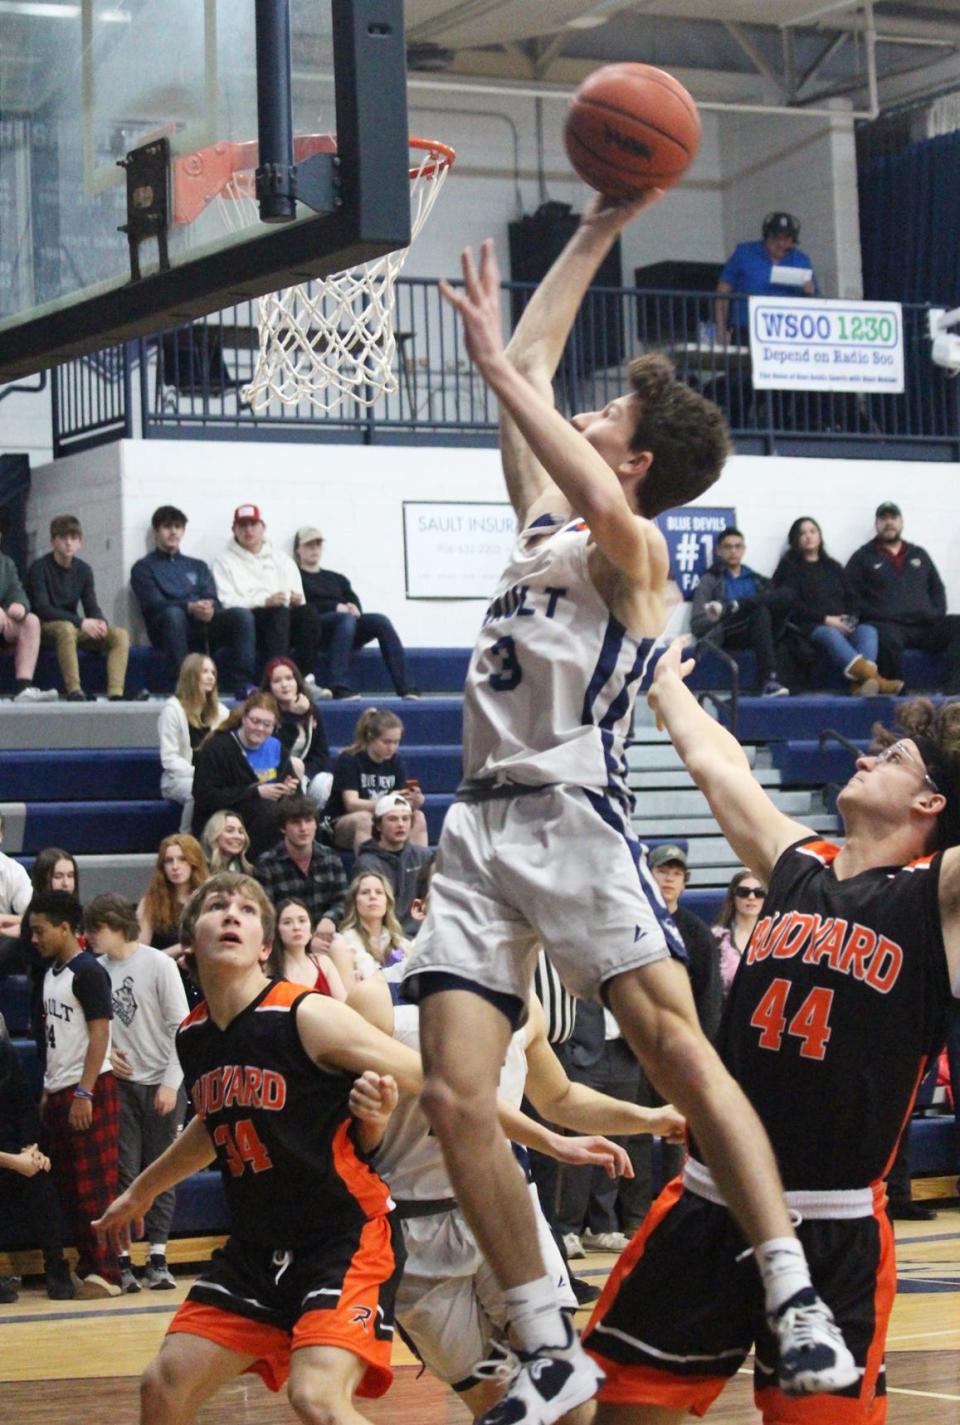 Sault guard Carter Oshelski drives to the basket during the first quarter of Wednesday night's Straits Area Conference matchup against the Rudyard Bulldogs.